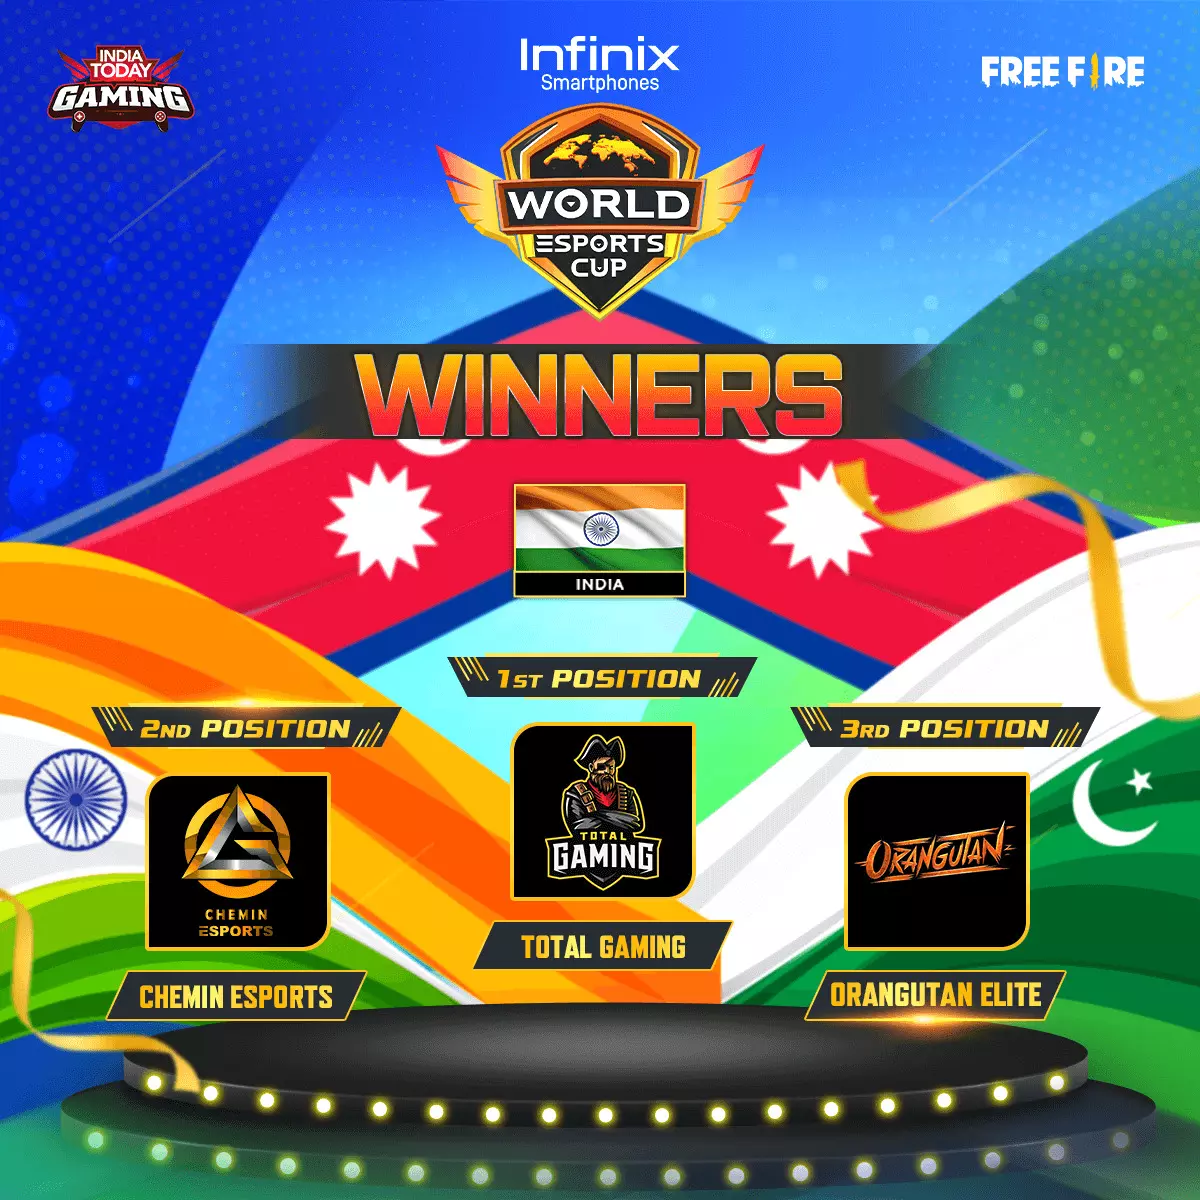 India beats Pakistan and Nepal to win the World Esports Cup 2021 Title